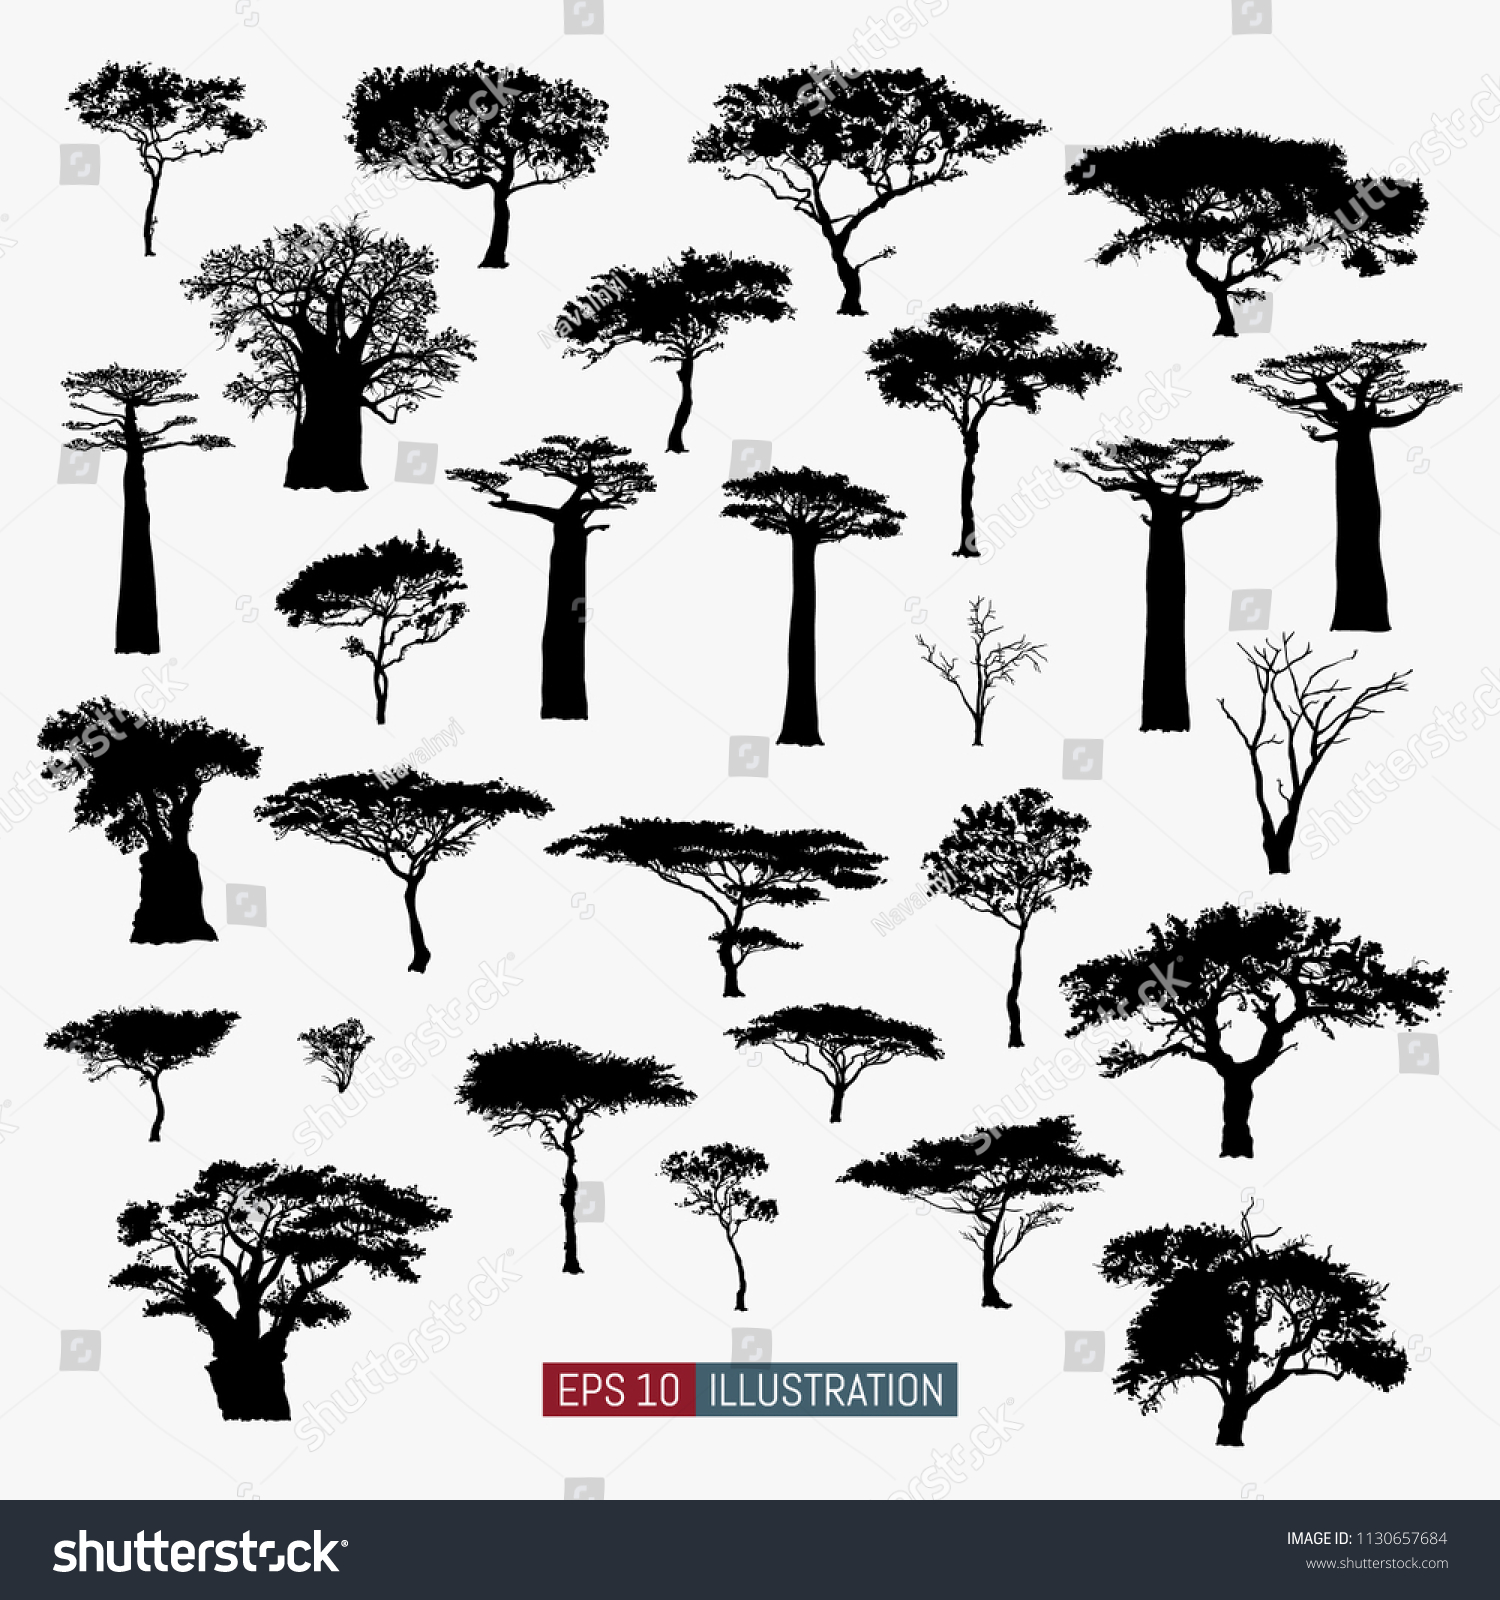 SVG of African tree isolated silhouettes set. Baobab, acacia and other. Elements for your design works. Vector illustration. svg